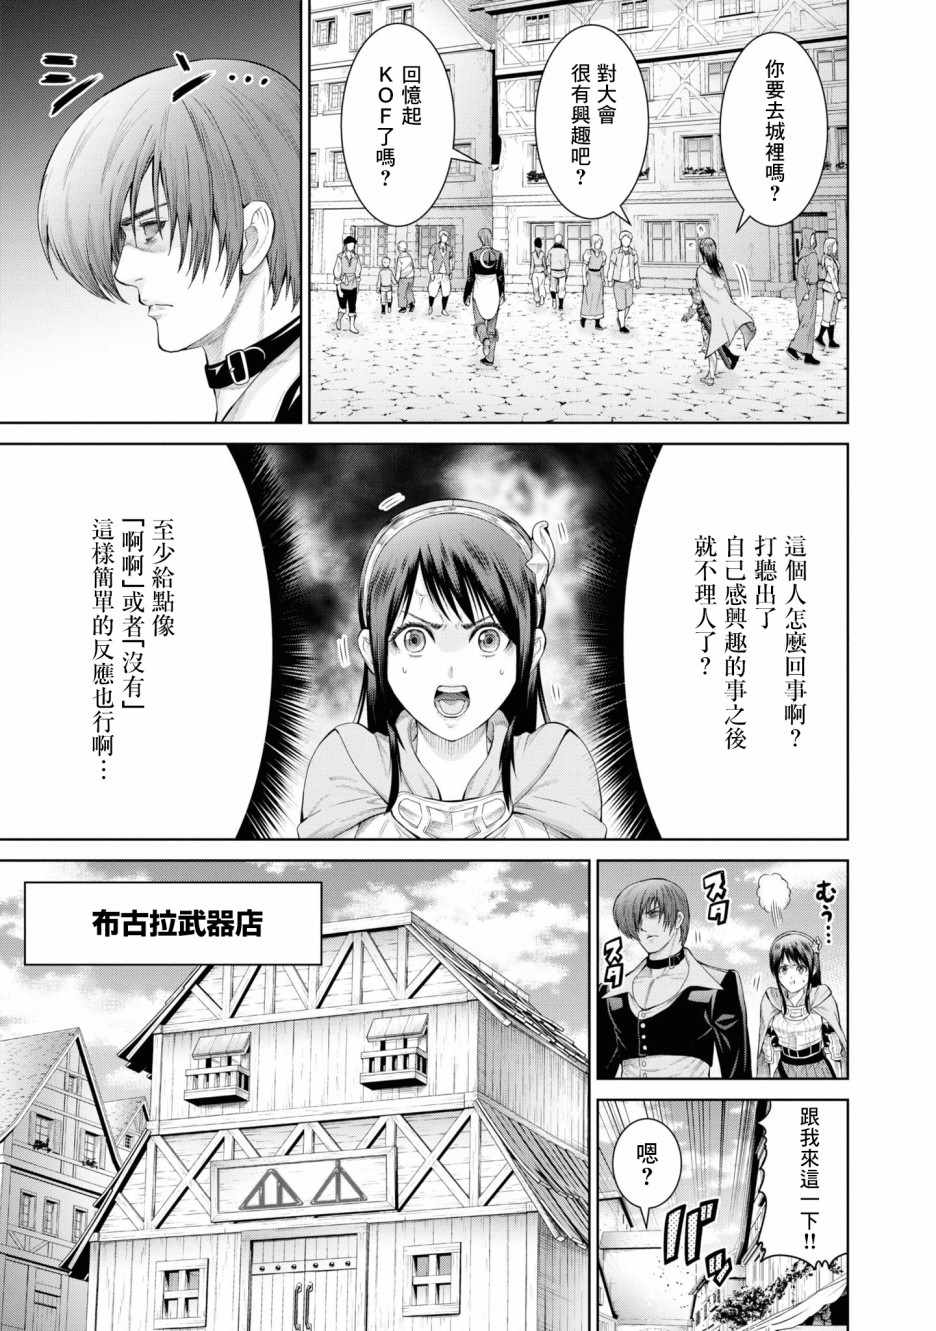 《THE KING OF FANTASY 八神庵的异世界无双》漫画 八神庵的异世界无双 004集